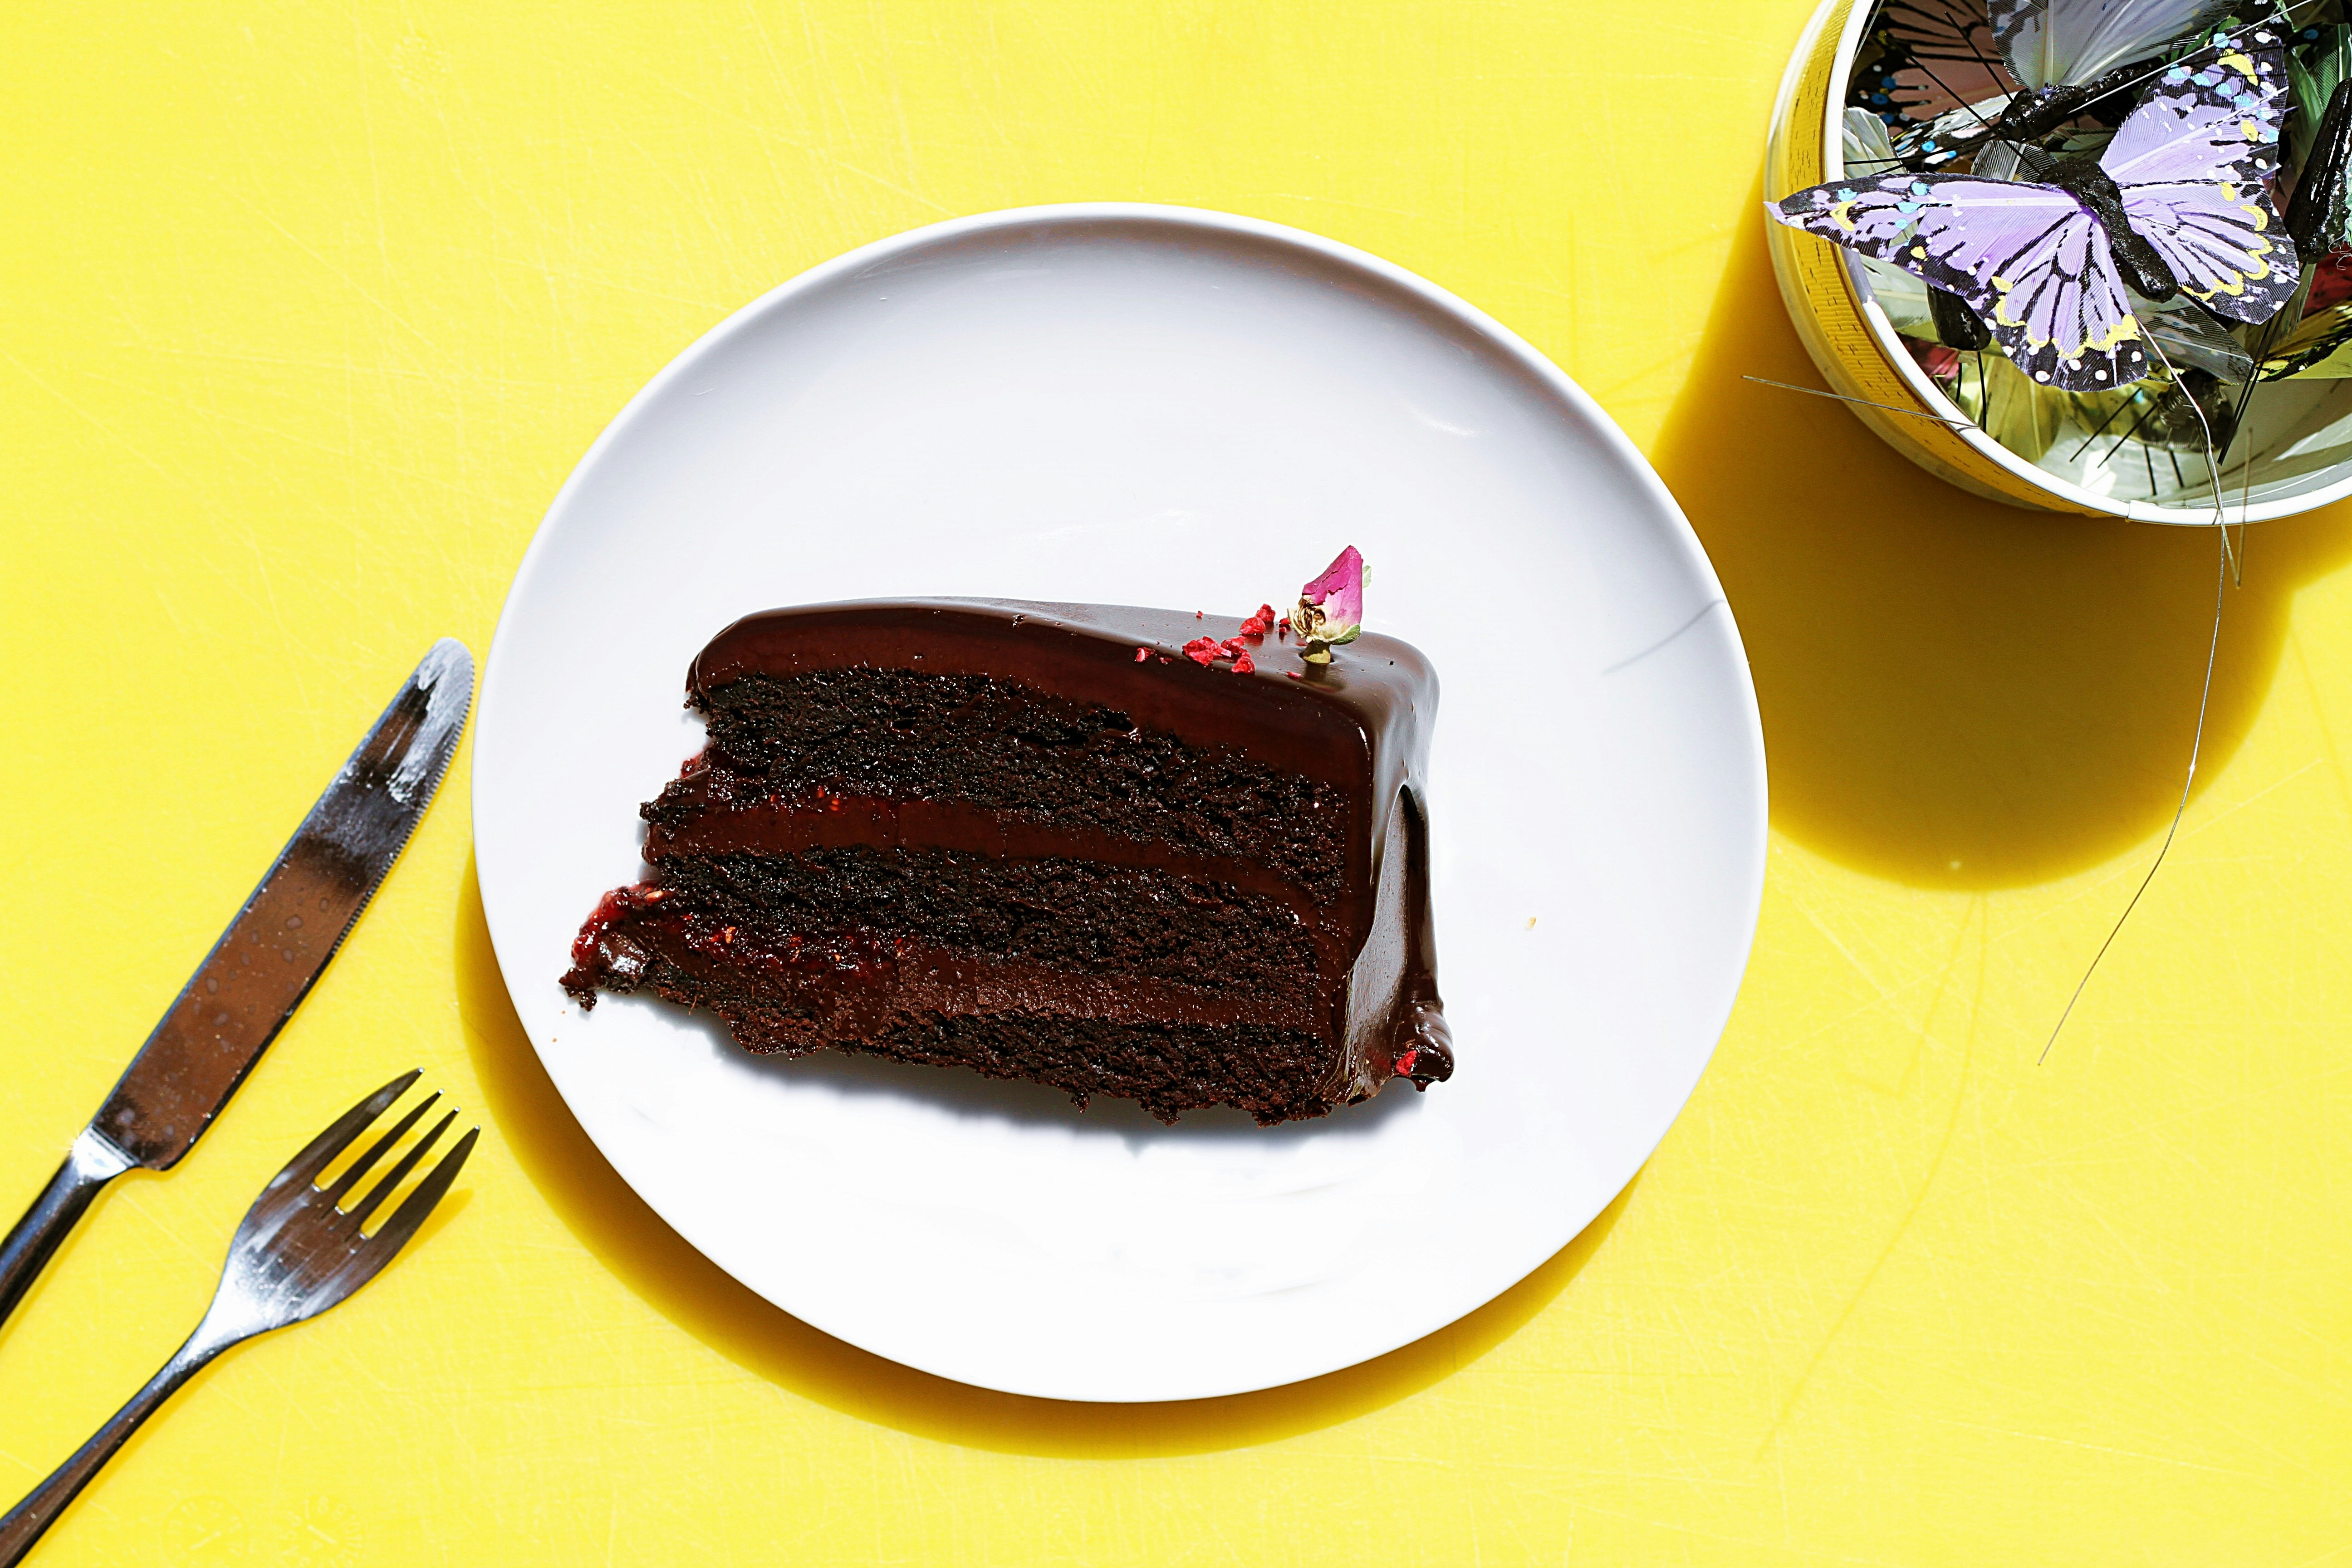 sliced chocolate moist cake in plate near gray stainless steel fork and knife